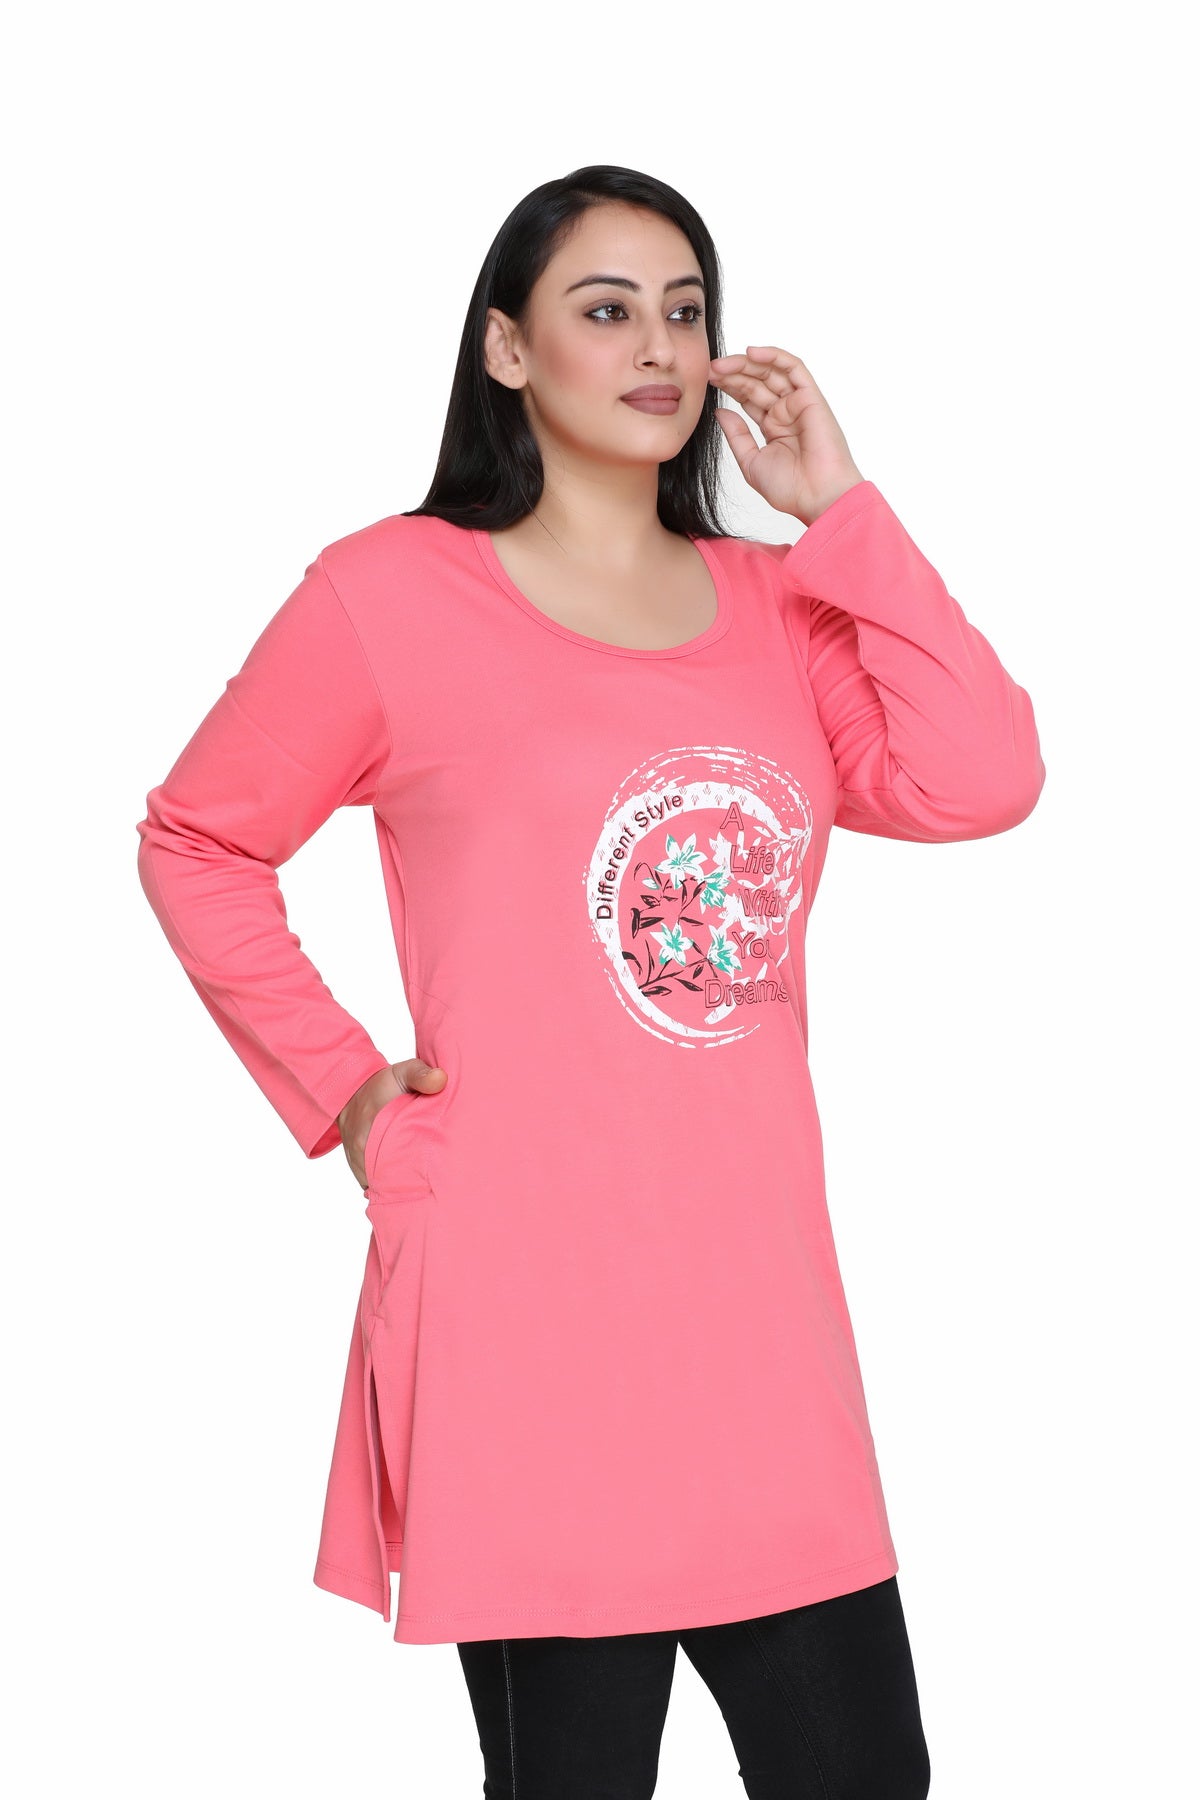 Cupid Women Plus Size Full Sleeves Cotton Long Top for Winter and Semi Winter For Women (Blush Pink) freeshipping - Cupid Clothings